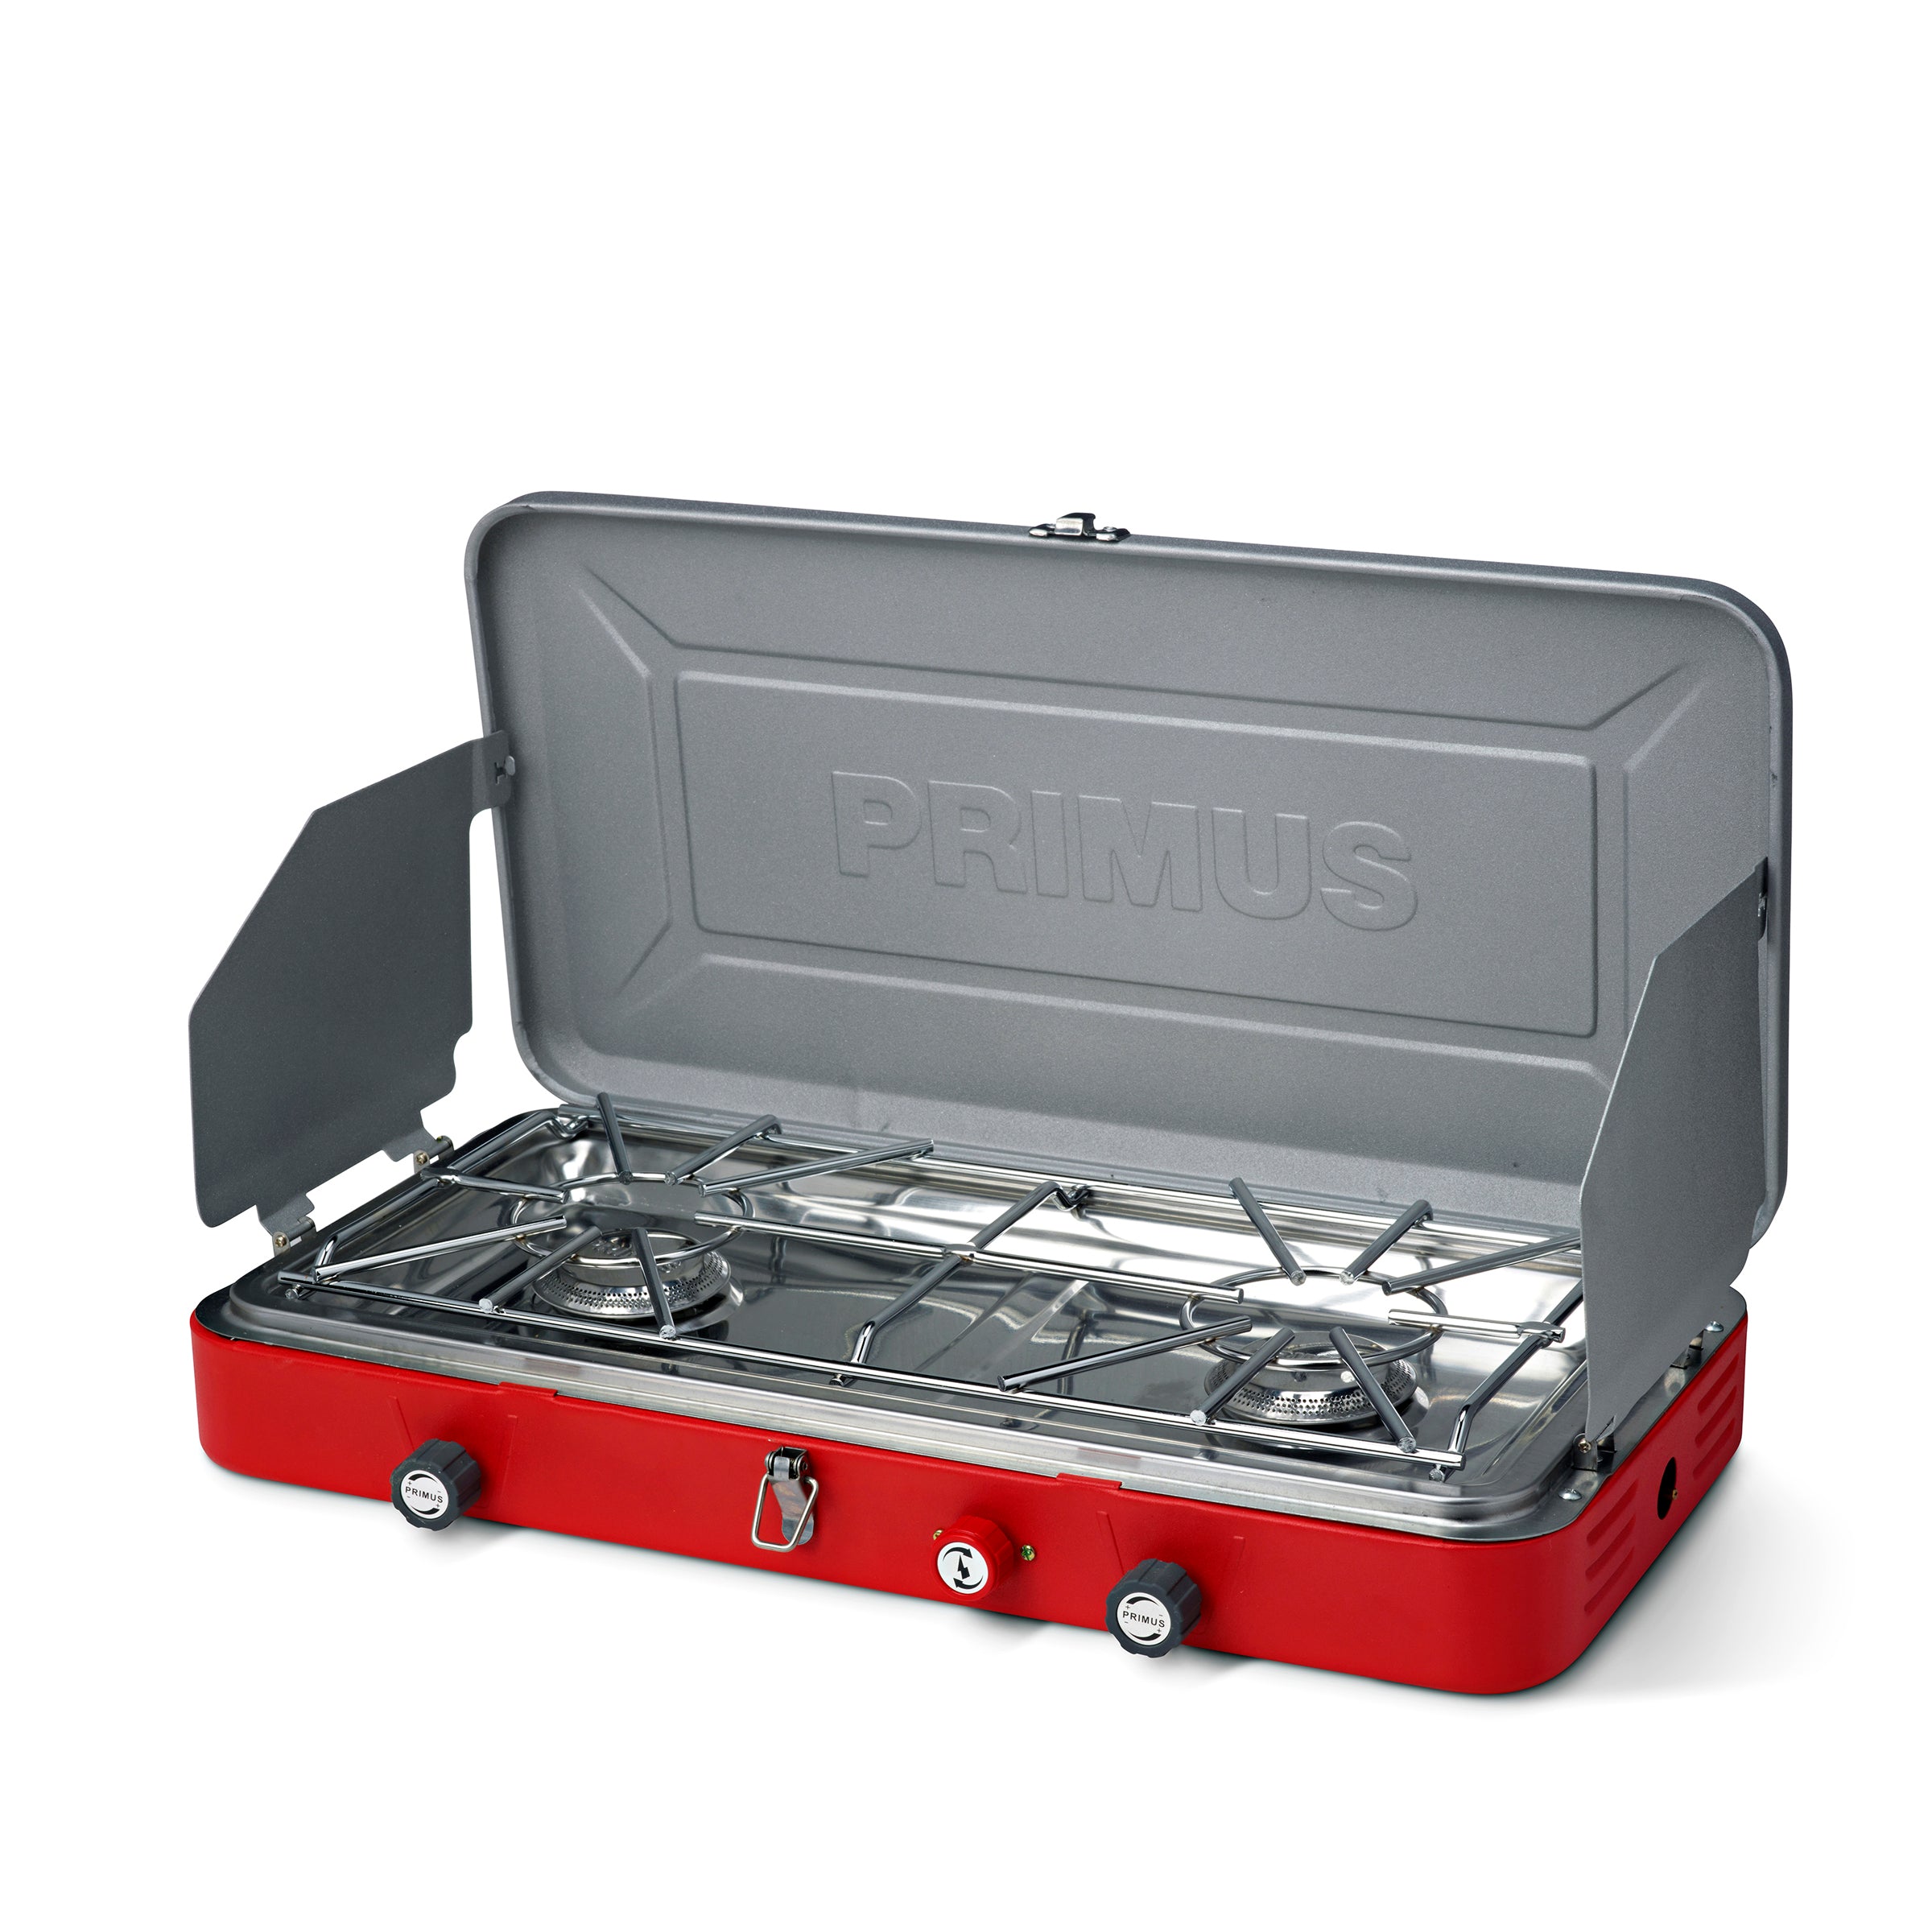 https://cs1.0ps.us/original/opplanet-primus-profile-stove-for-us-and-canada-red-grey-p-329085-main